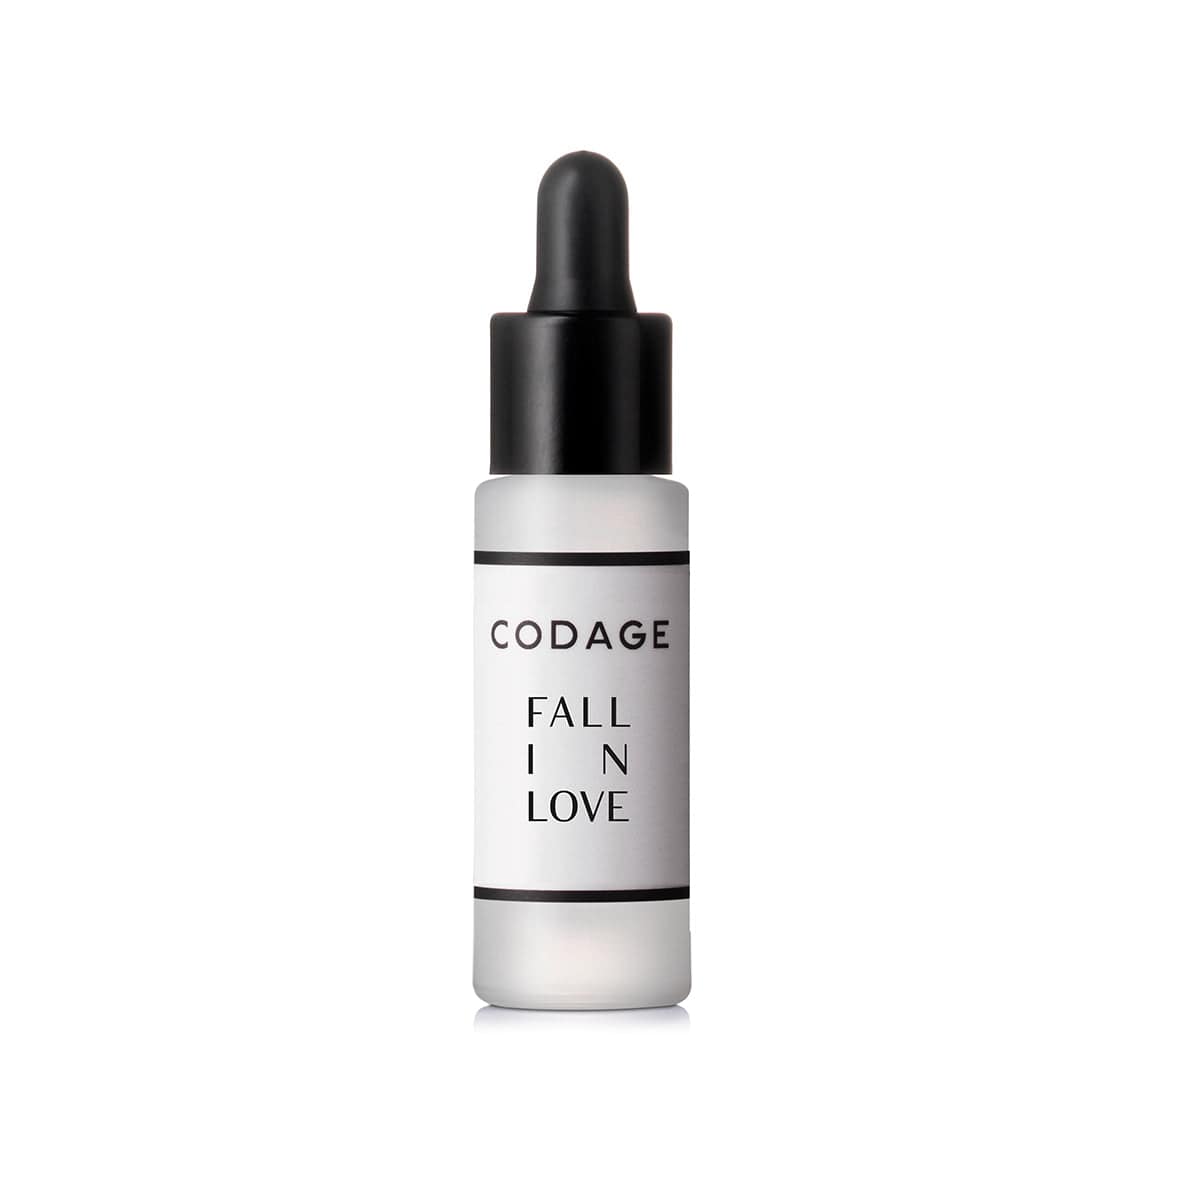 CODAGE Paris Product Collection Face Serum Fall in Love Free from 170€ of purchase